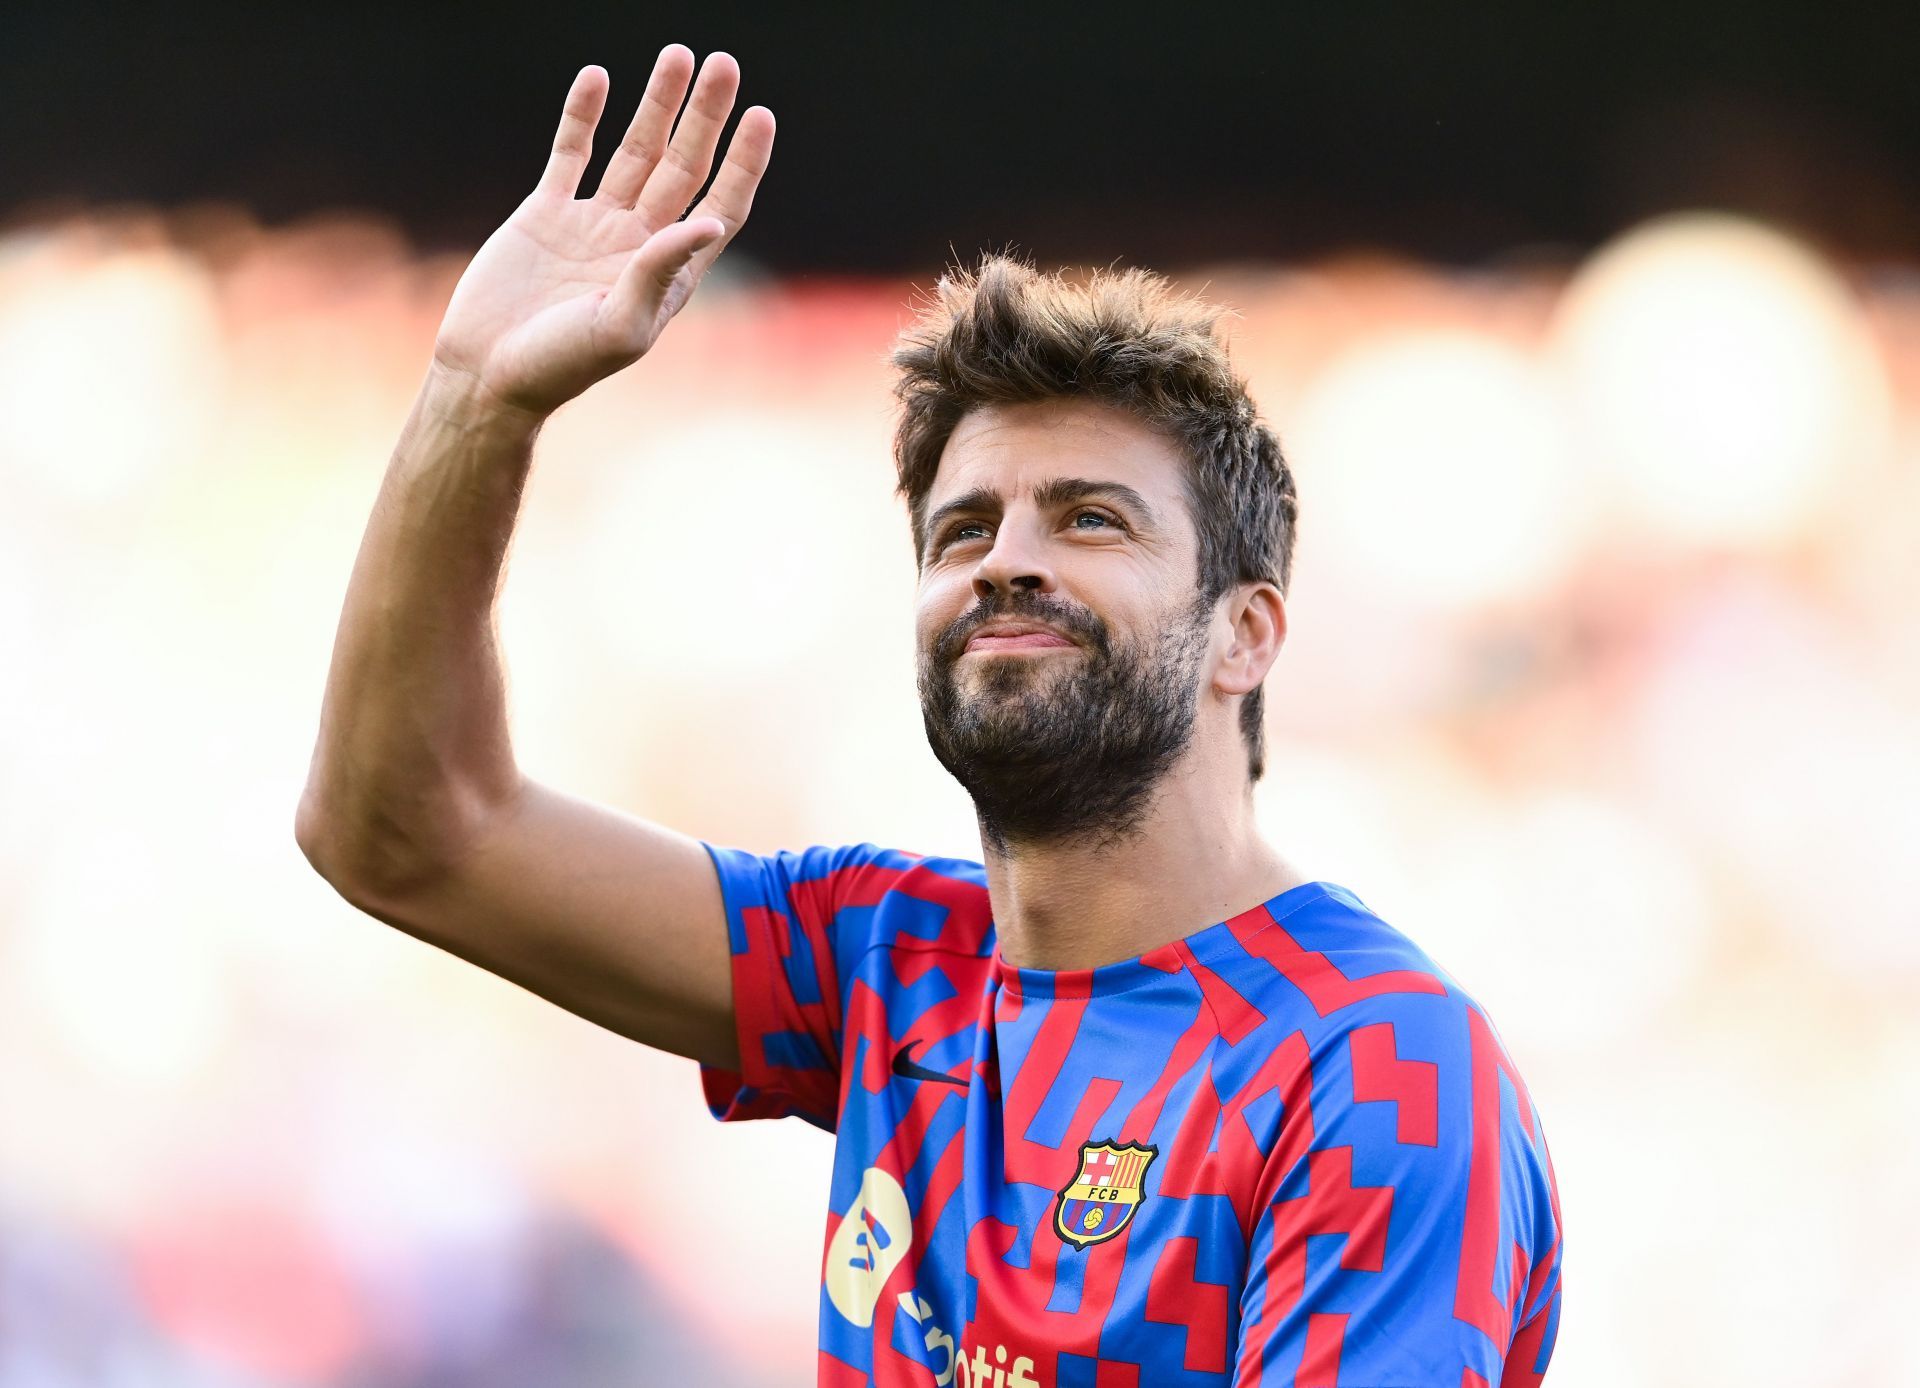 Pique is yet to feature for the Catalan giants this season